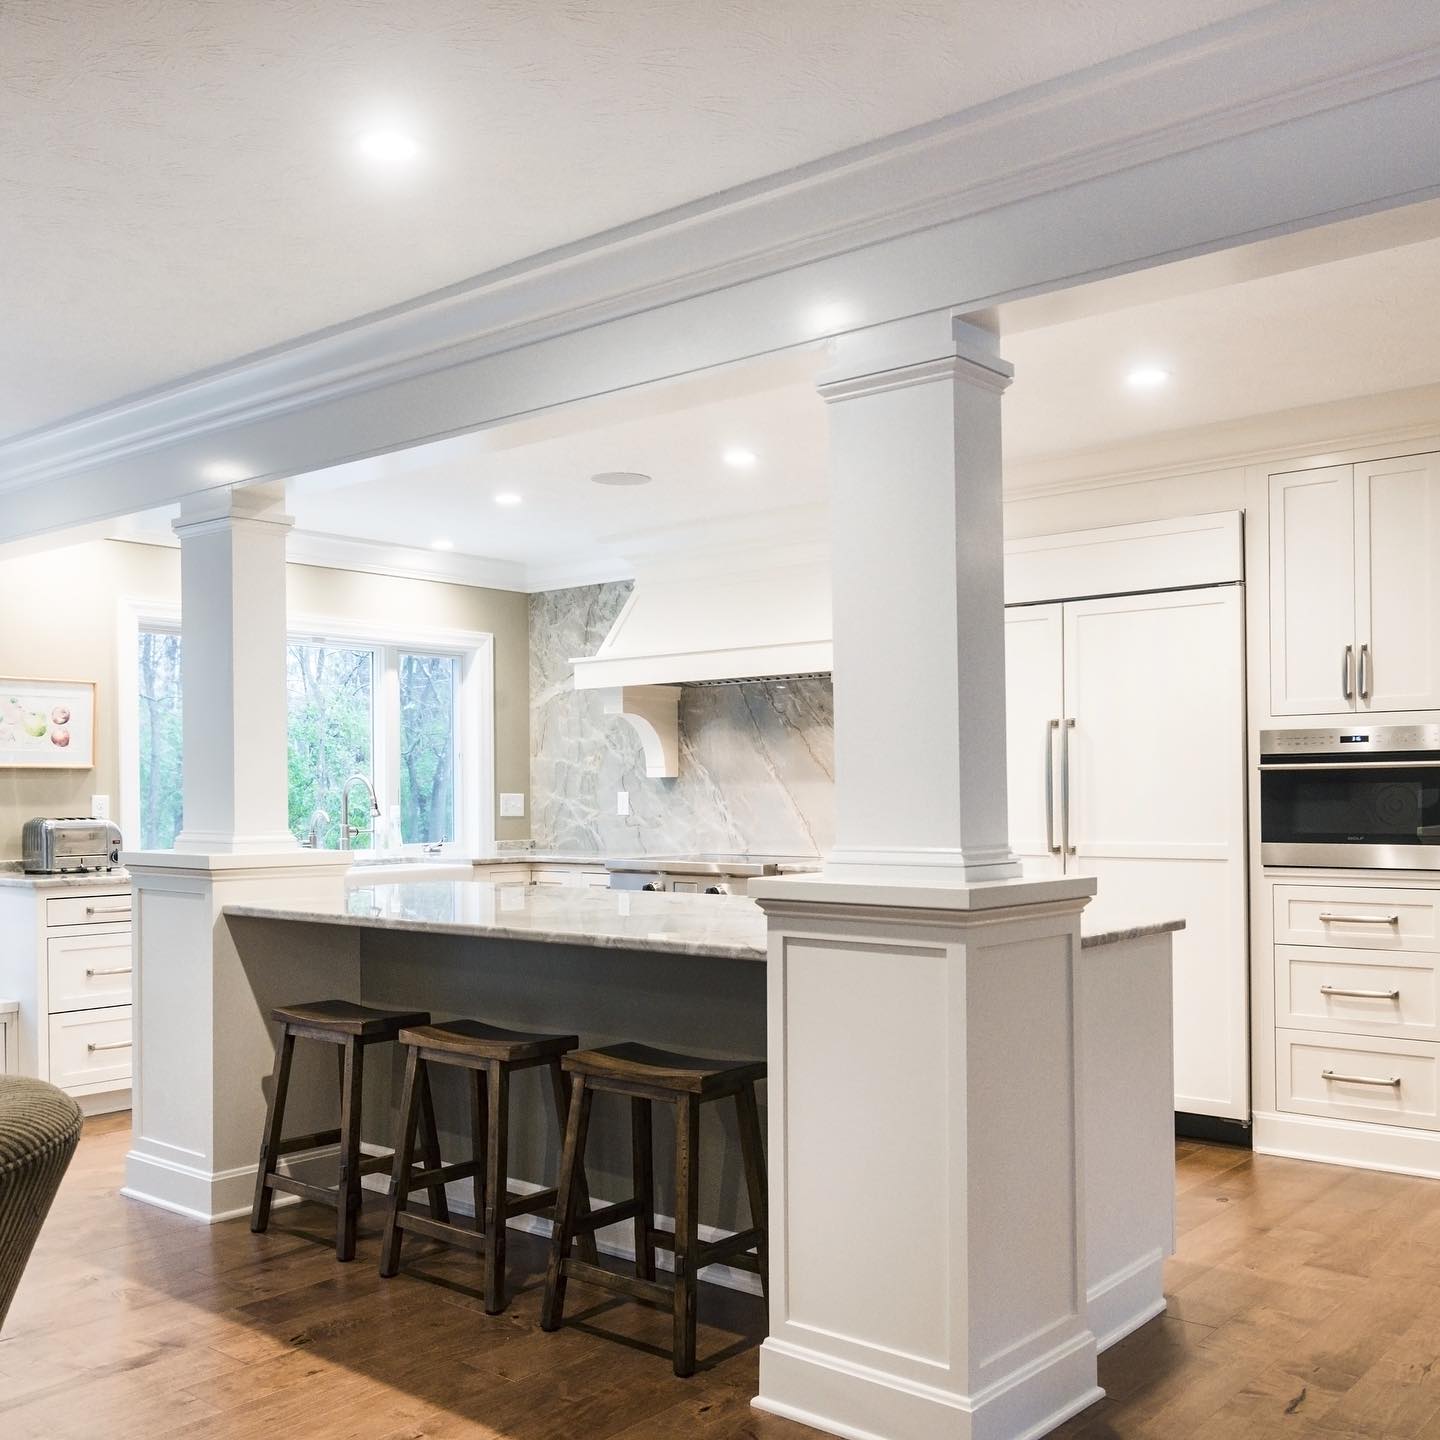 custom kitchen cabinets, support beam, island, trim and crown molding